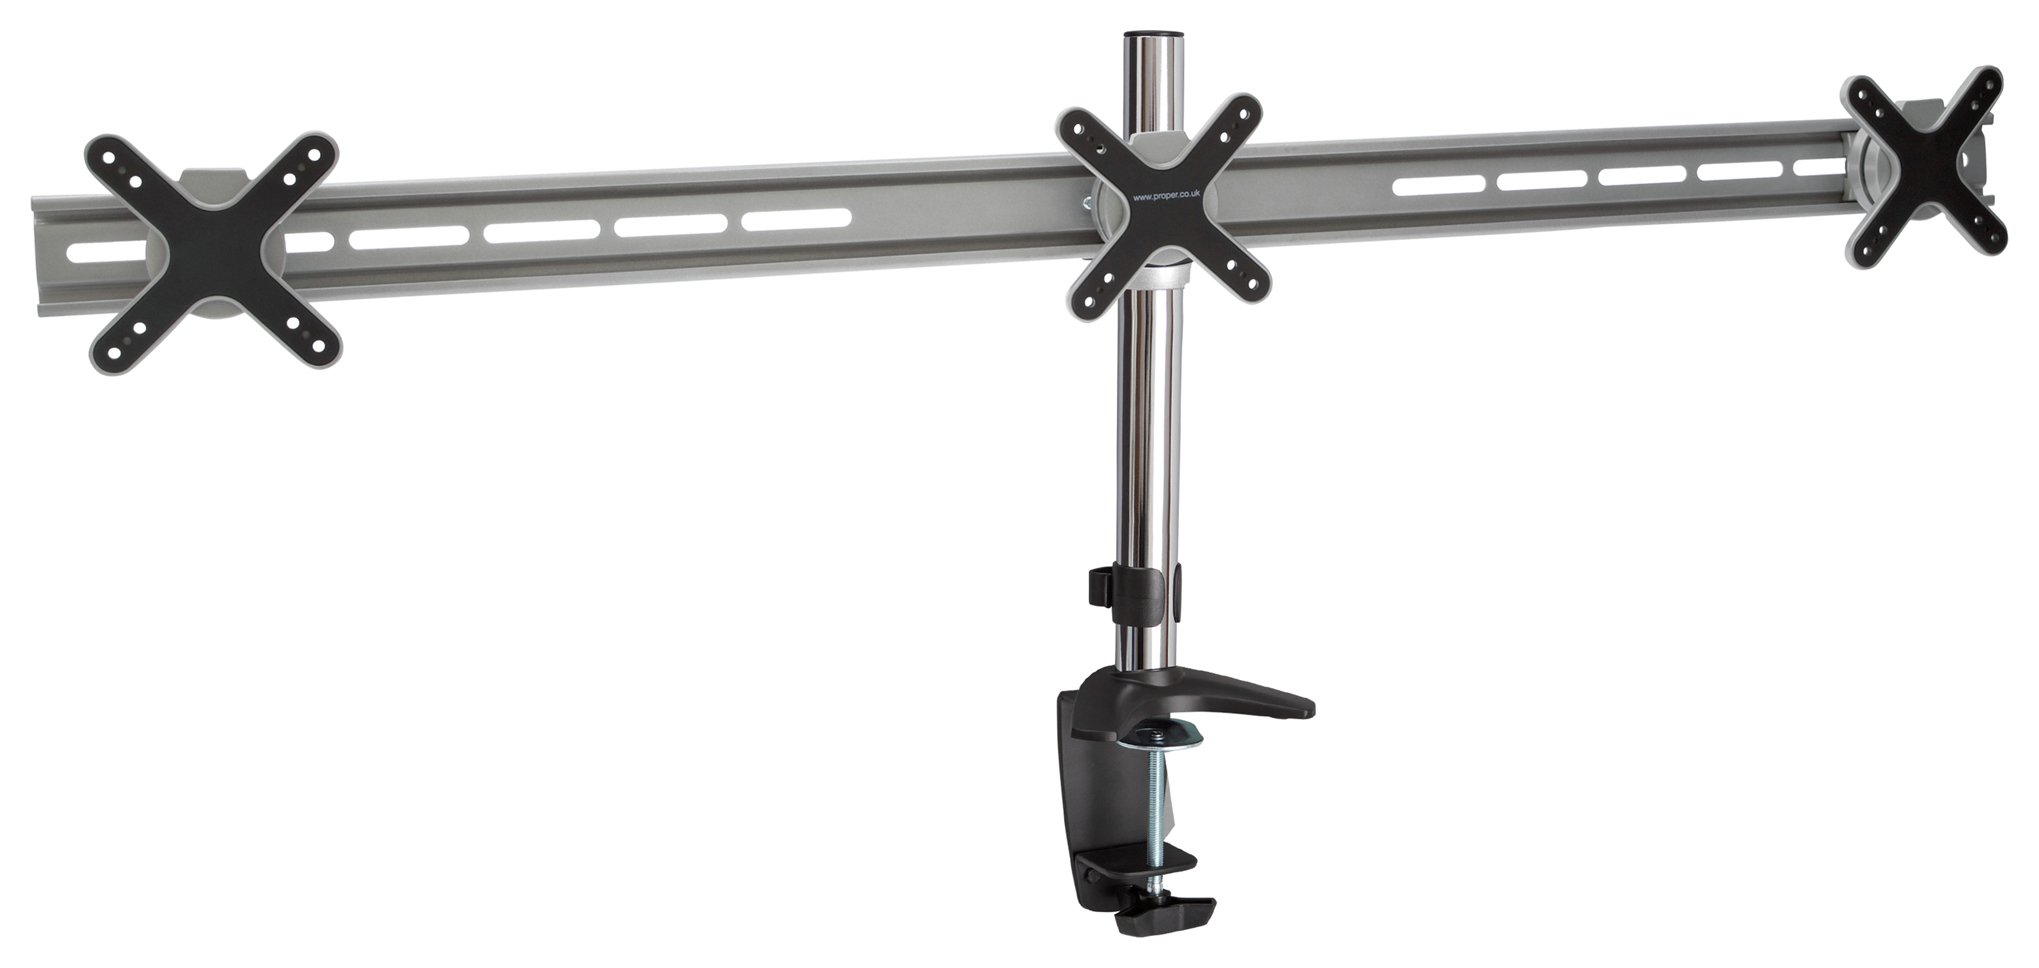 Proper Triple Monitor Desk Mount 19 - 27 Inches. Review